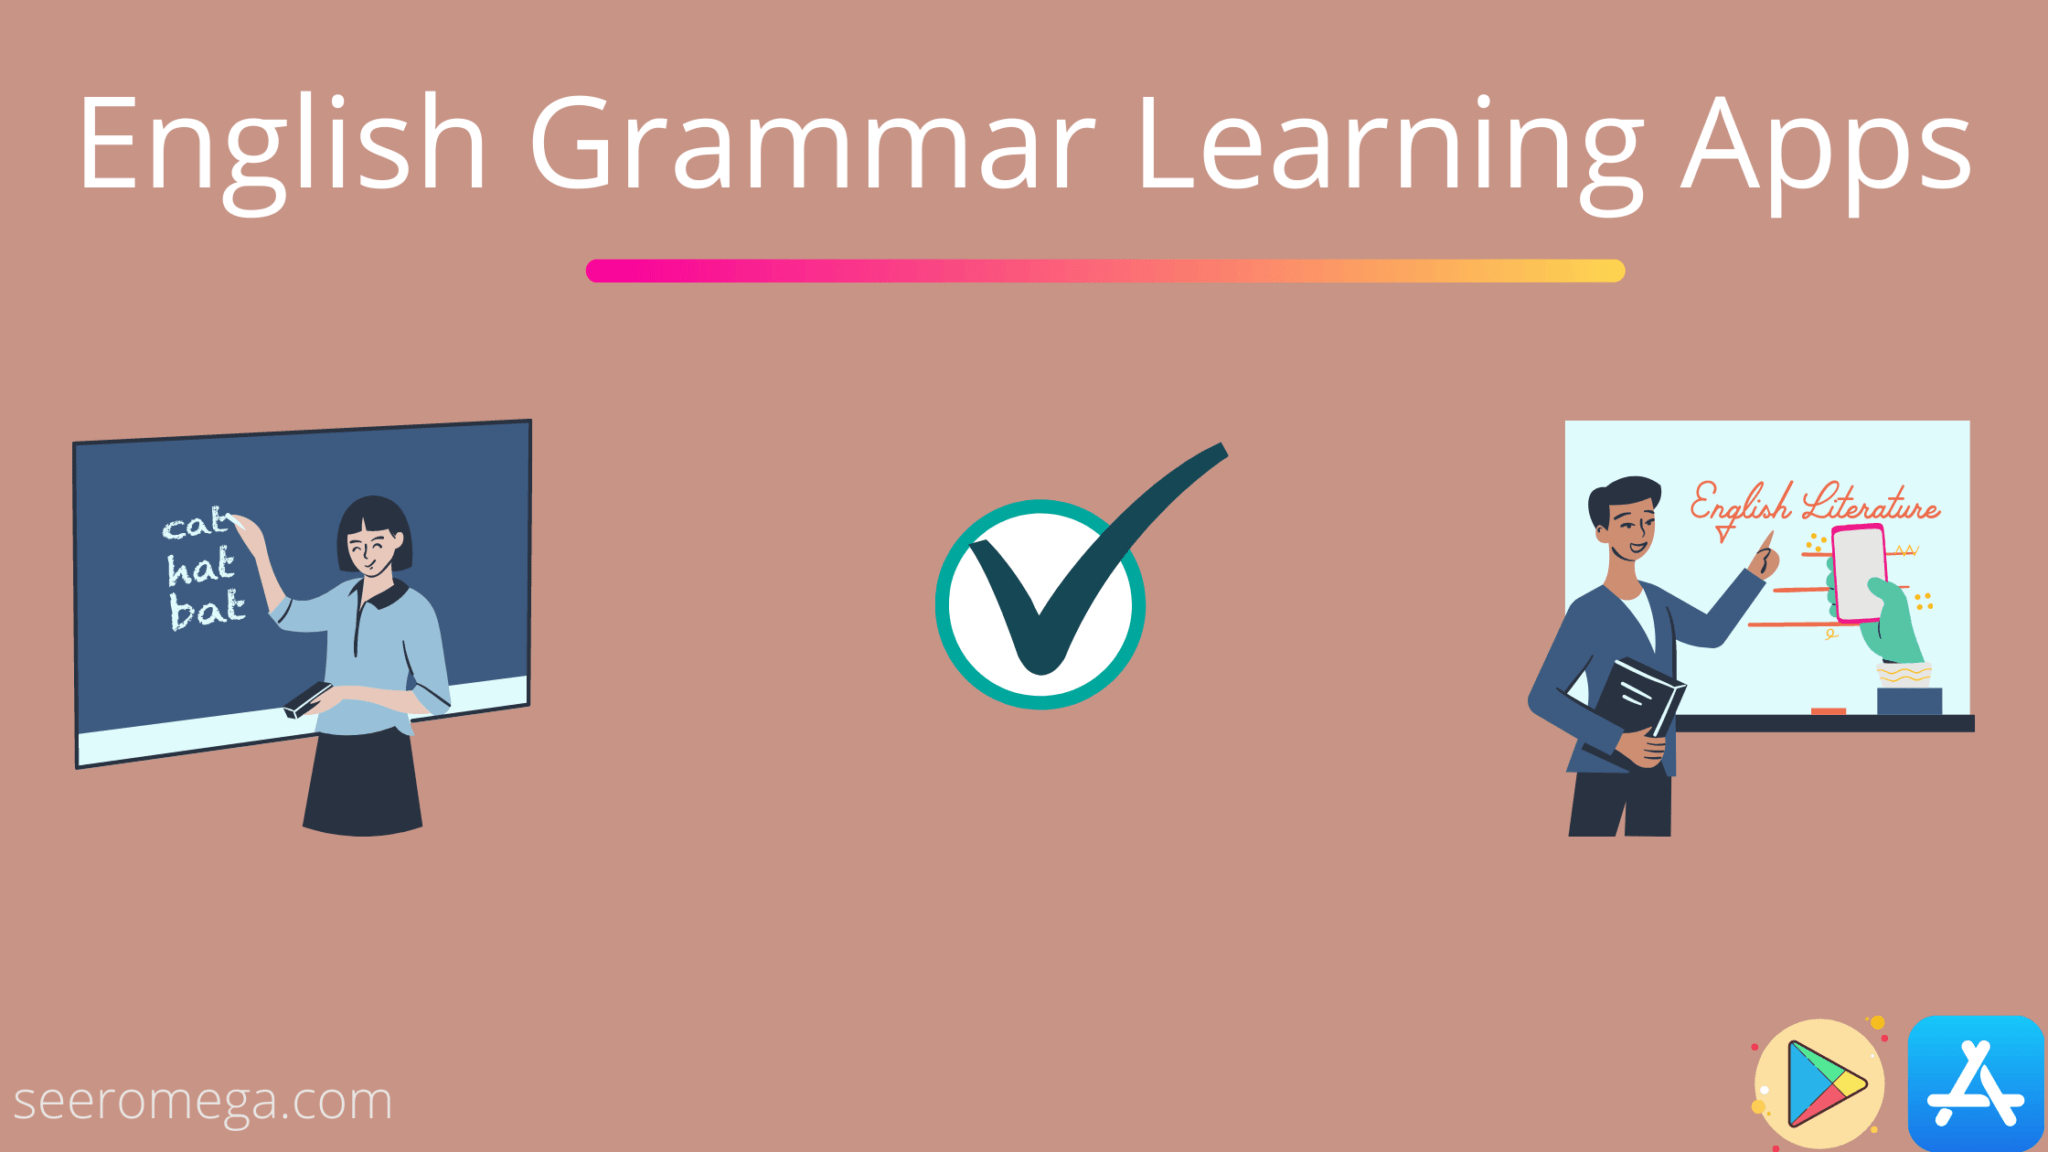 10-free-english-grammar-learning-apps-for-students-seeromega